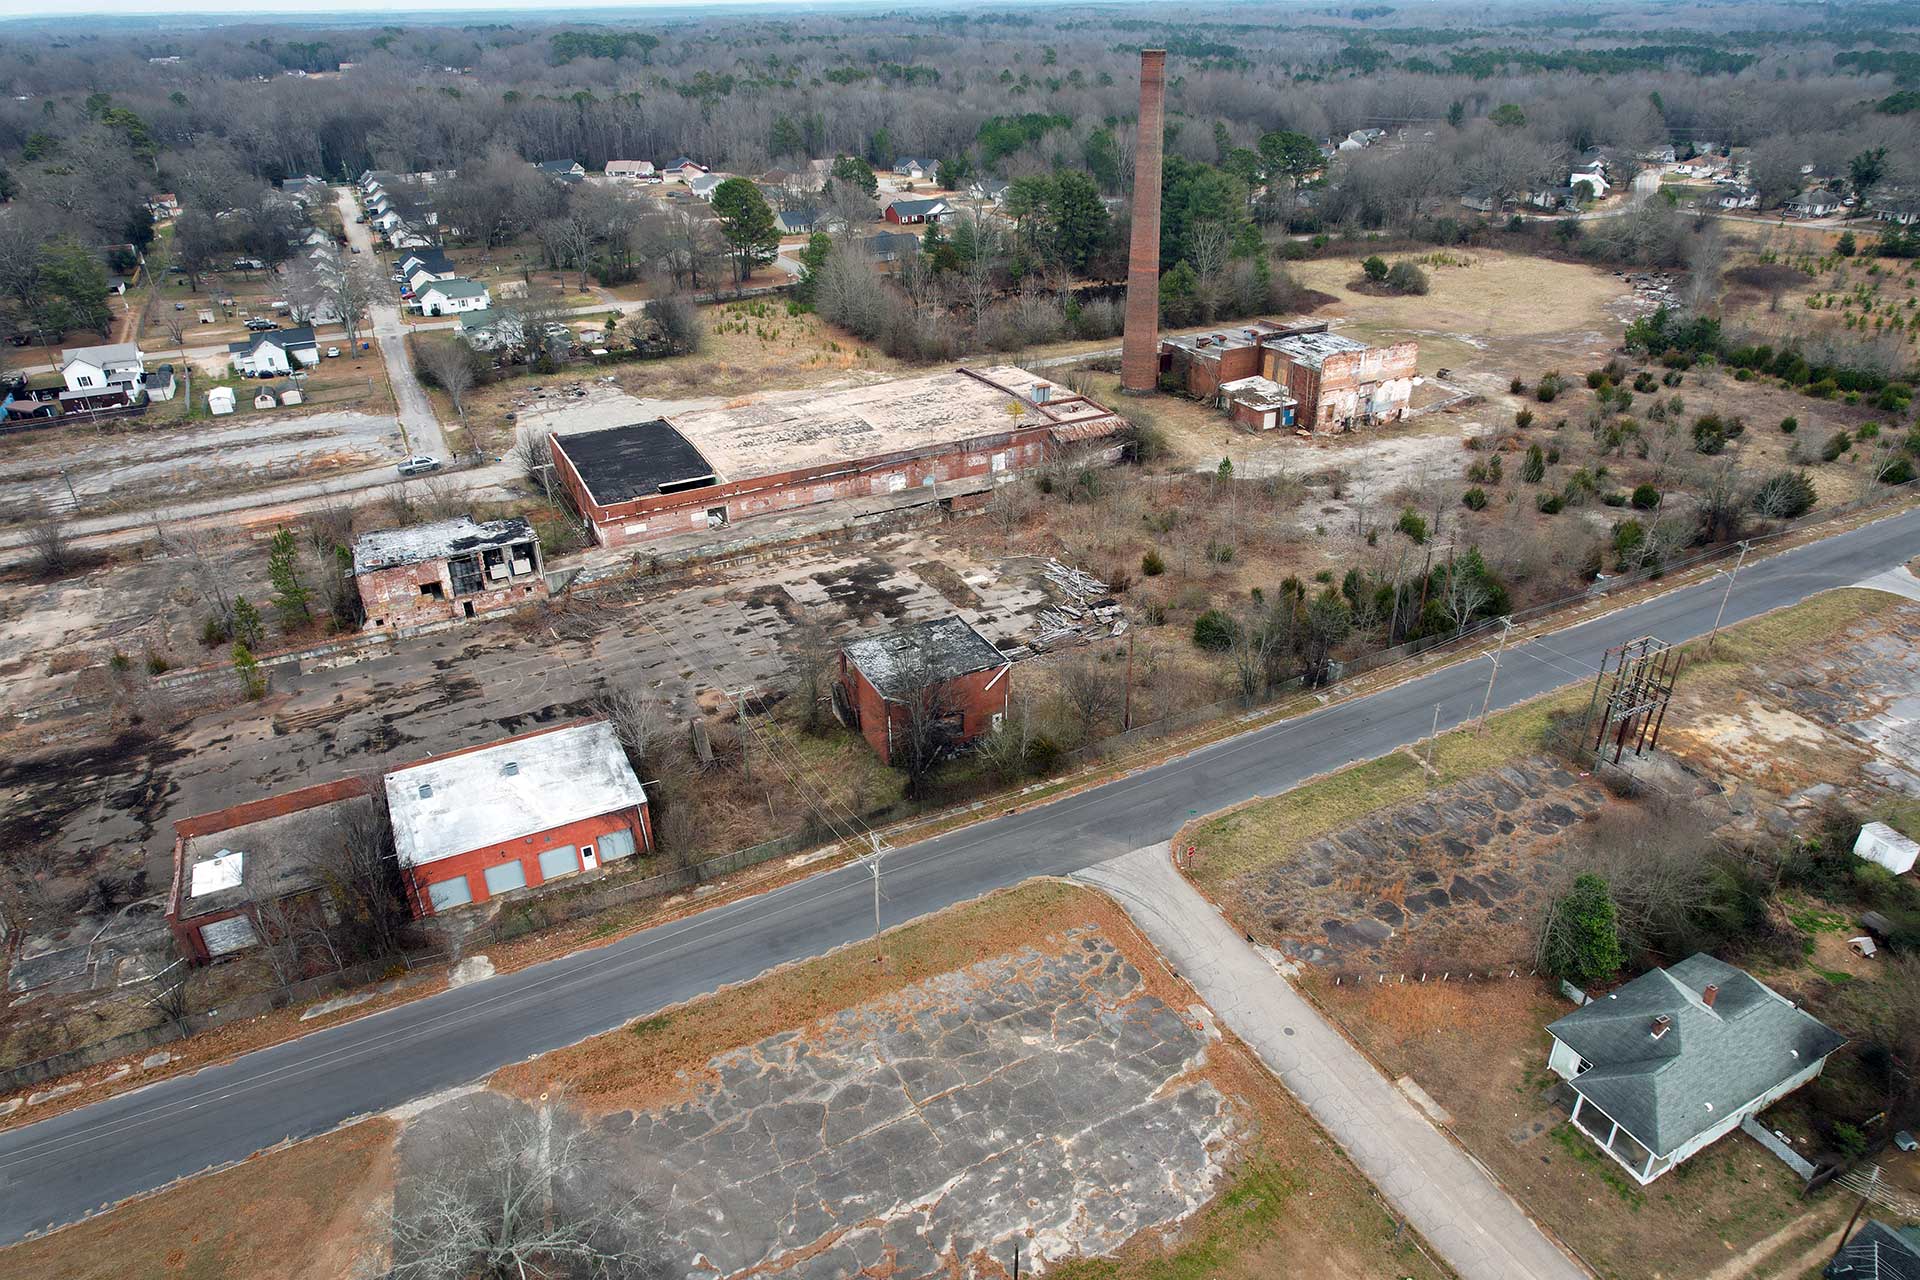 Ariel view of an old mill site